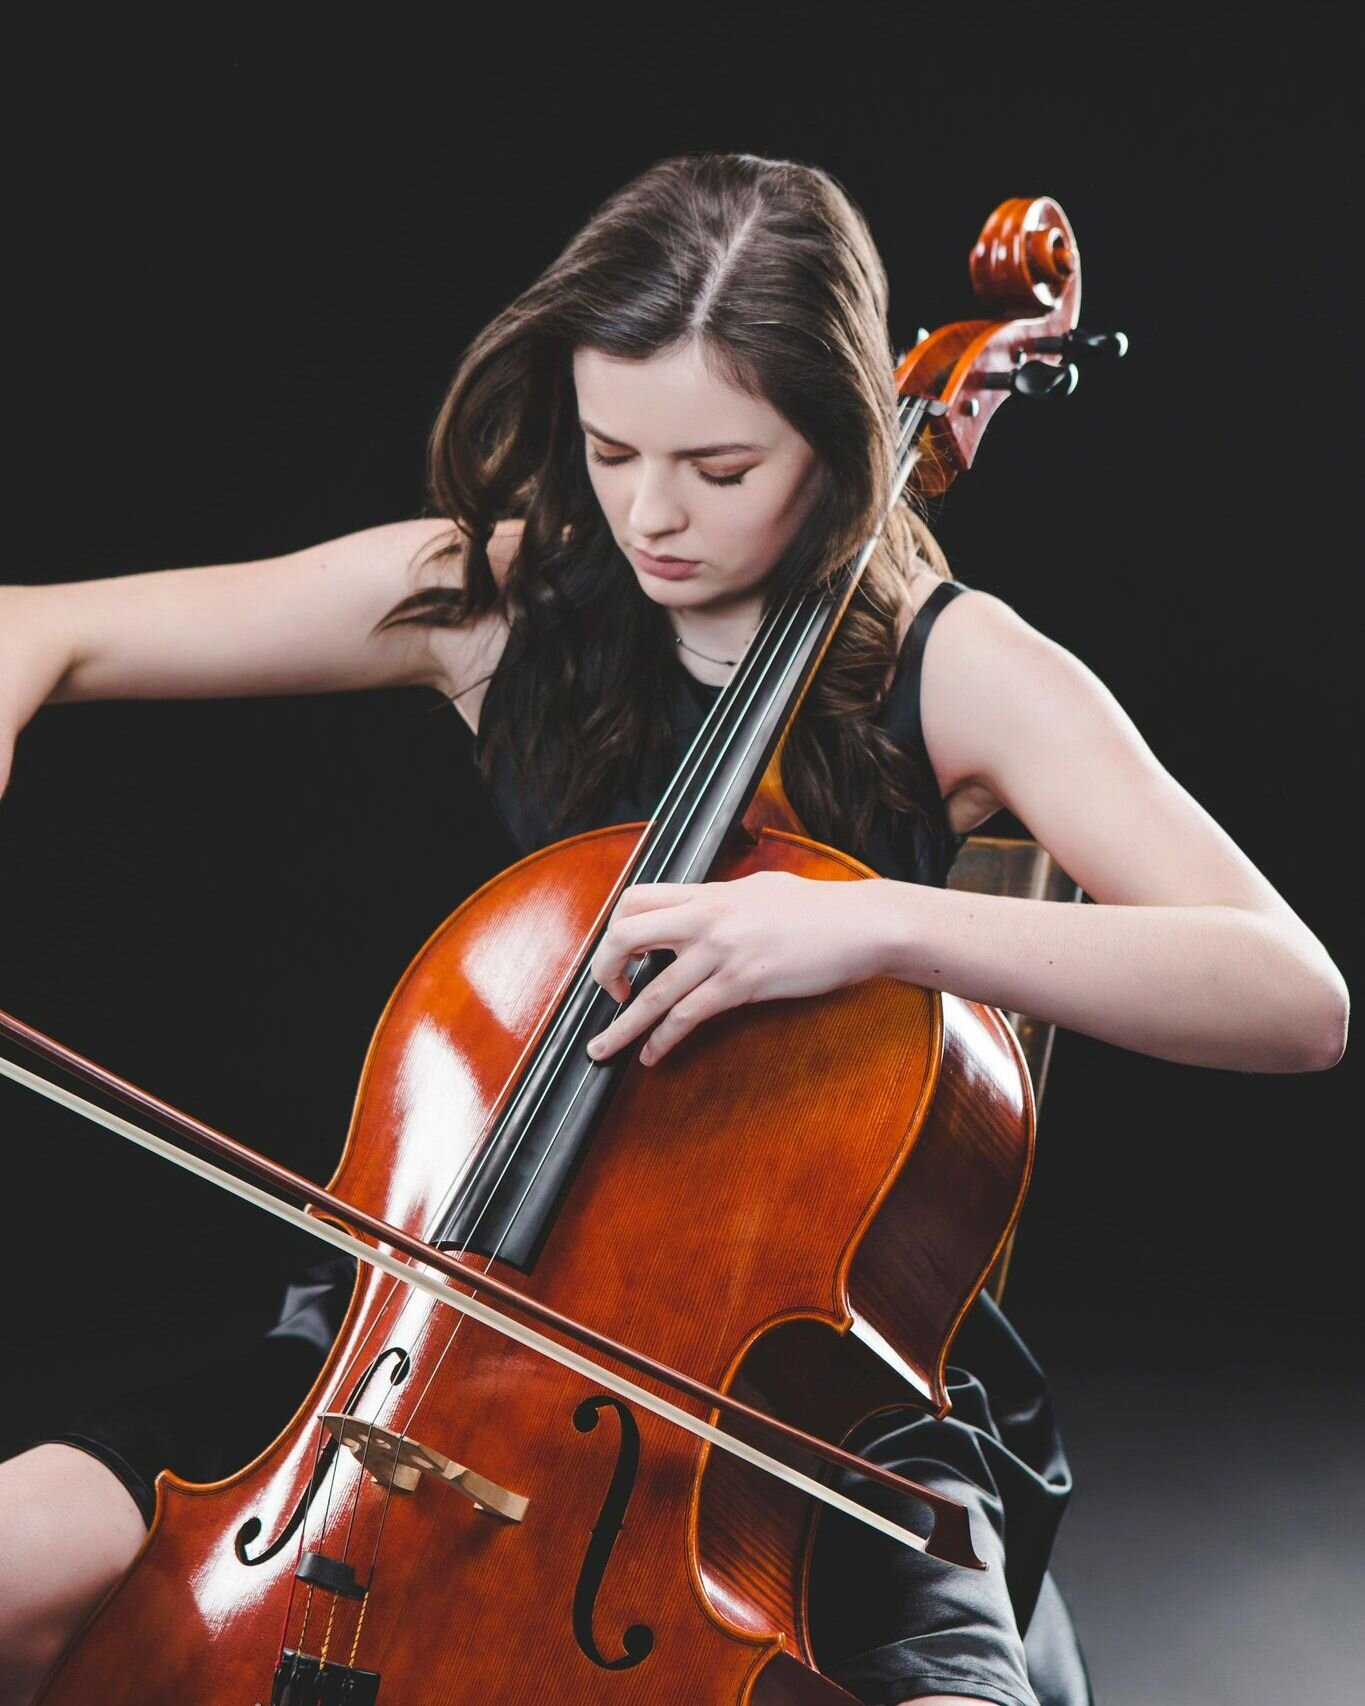 Rosemont Cellist @lauren.olofsson 

&ldquo;Playing Cello can connect me with people that don&rsquo;t necessarily listen to Classical Music and change how they feel and see the world.&rdquo;

#cello #music #classical #stringquartet #sydneymusicians